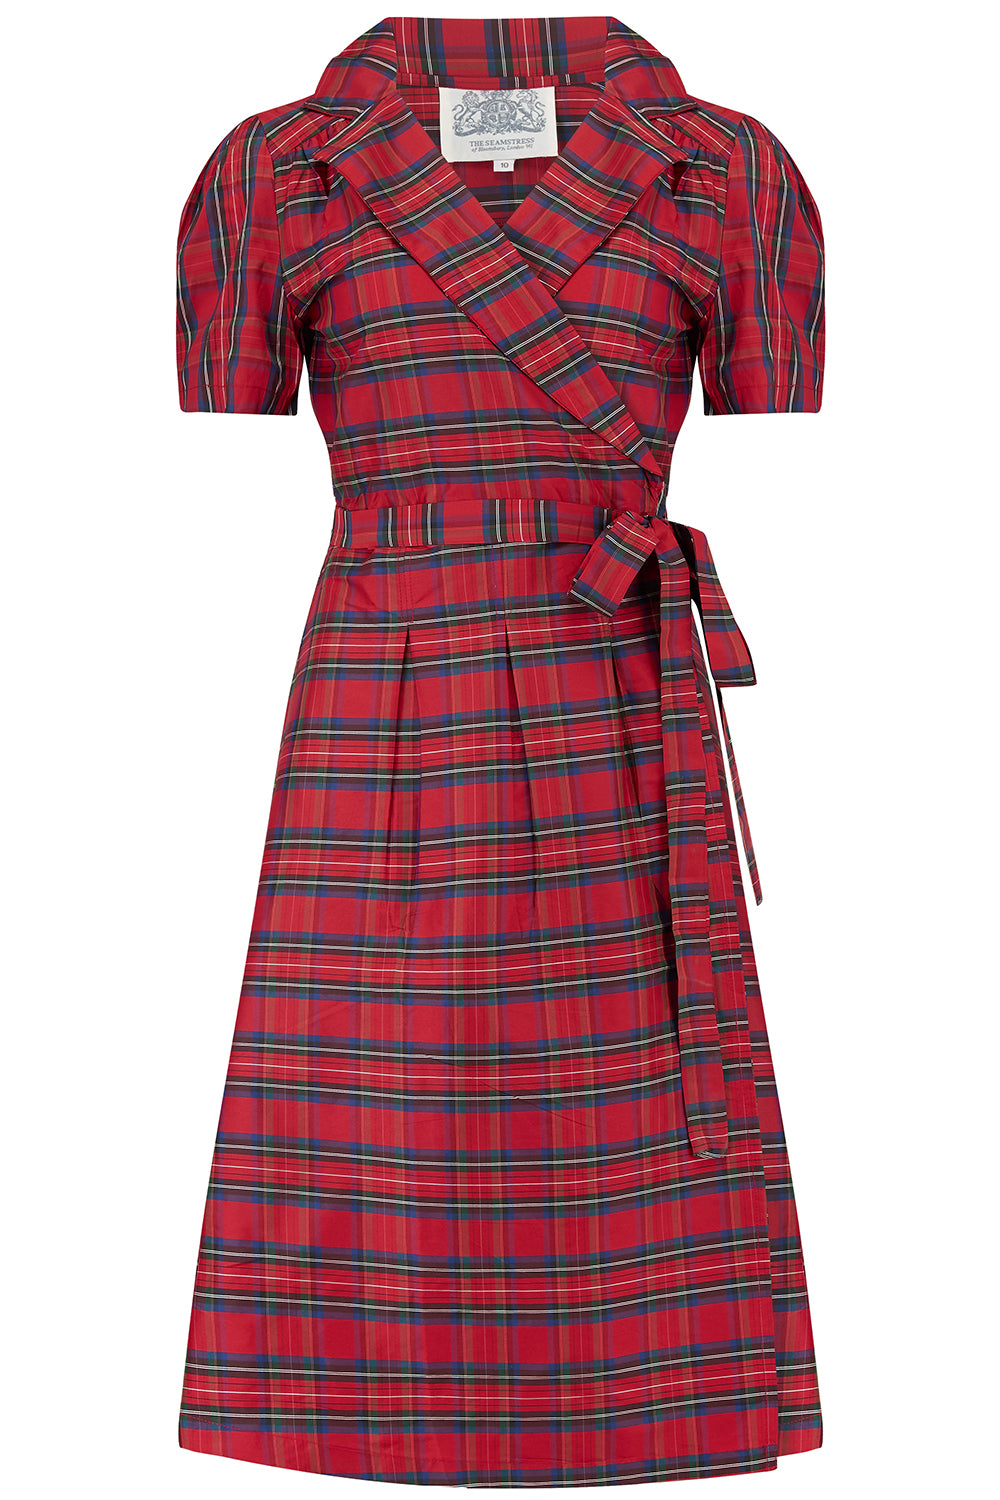 "Peggy" Wrap Dress in Red Taffeta Tartan, Classic 1940s Vintage Style - True and authentic vintage style clothing, inspired by the Classic styles of CC41 , WW2 and the fun 1950s RocknRoll era, for everyday wear plus events like Goodwood Revival, Twinwood Festival and Viva Las Vegas Rockabilly Weekend Rock n Romance The Seamstress of Bloomsbury